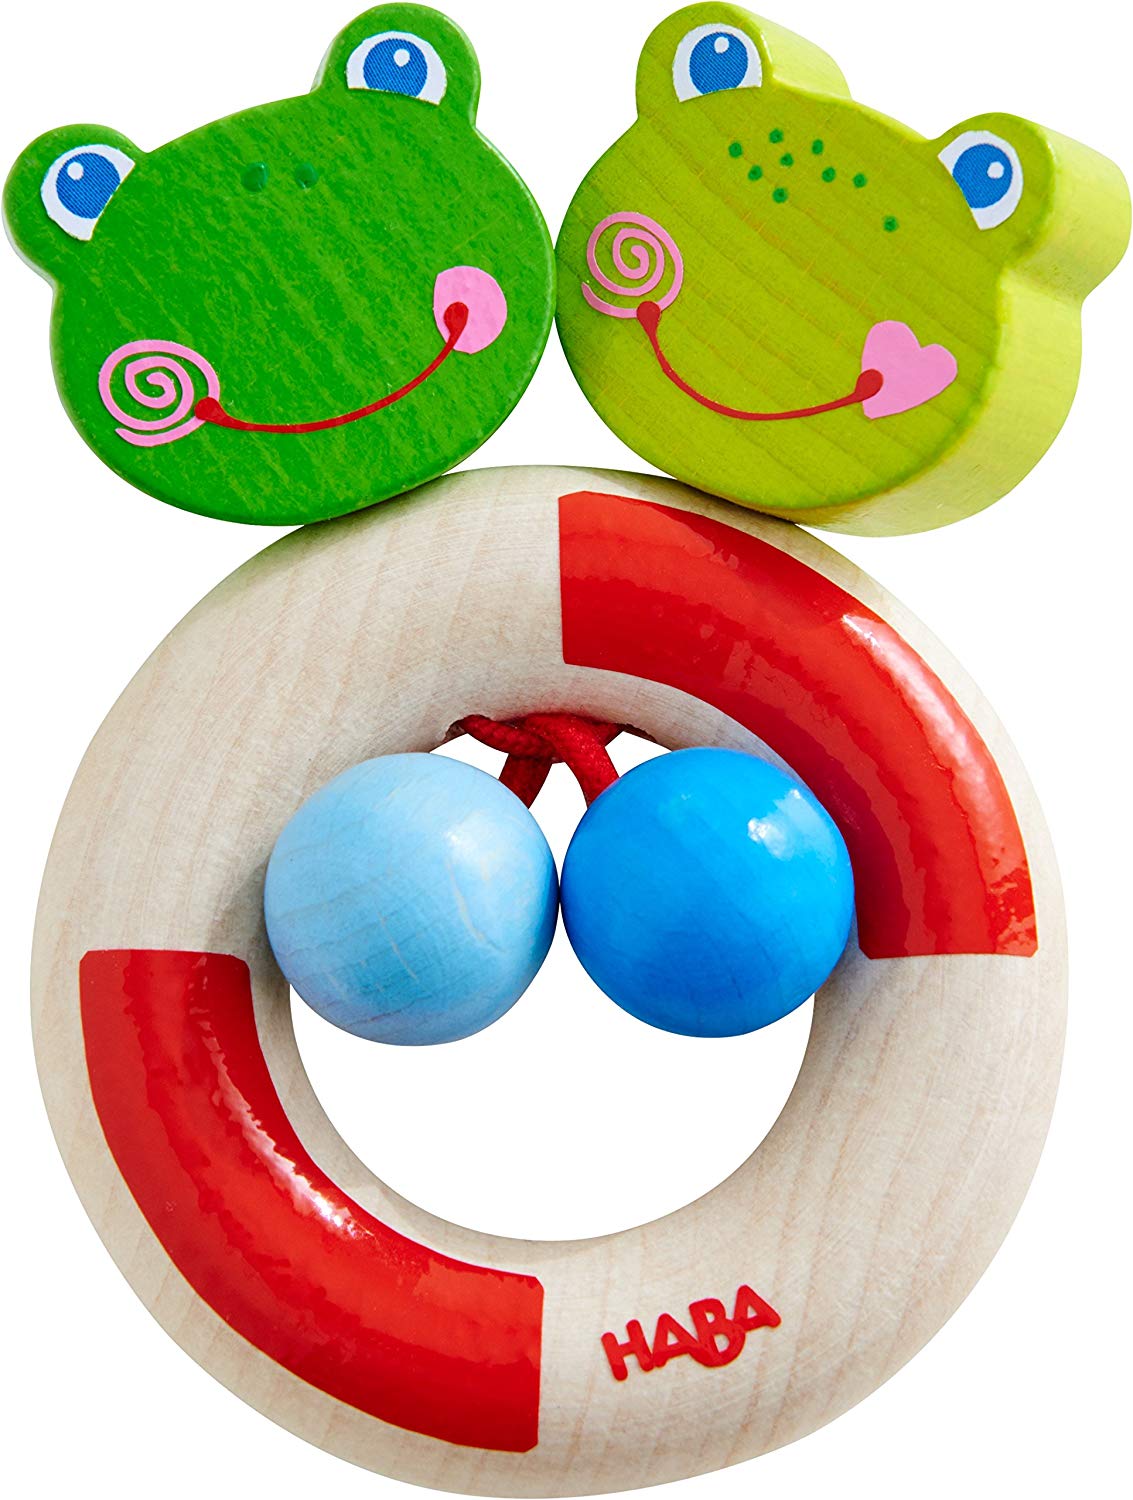 Haba 303923 Grip Toy Frog Concert | Wooden Grip Toy With Wooden Colourful F